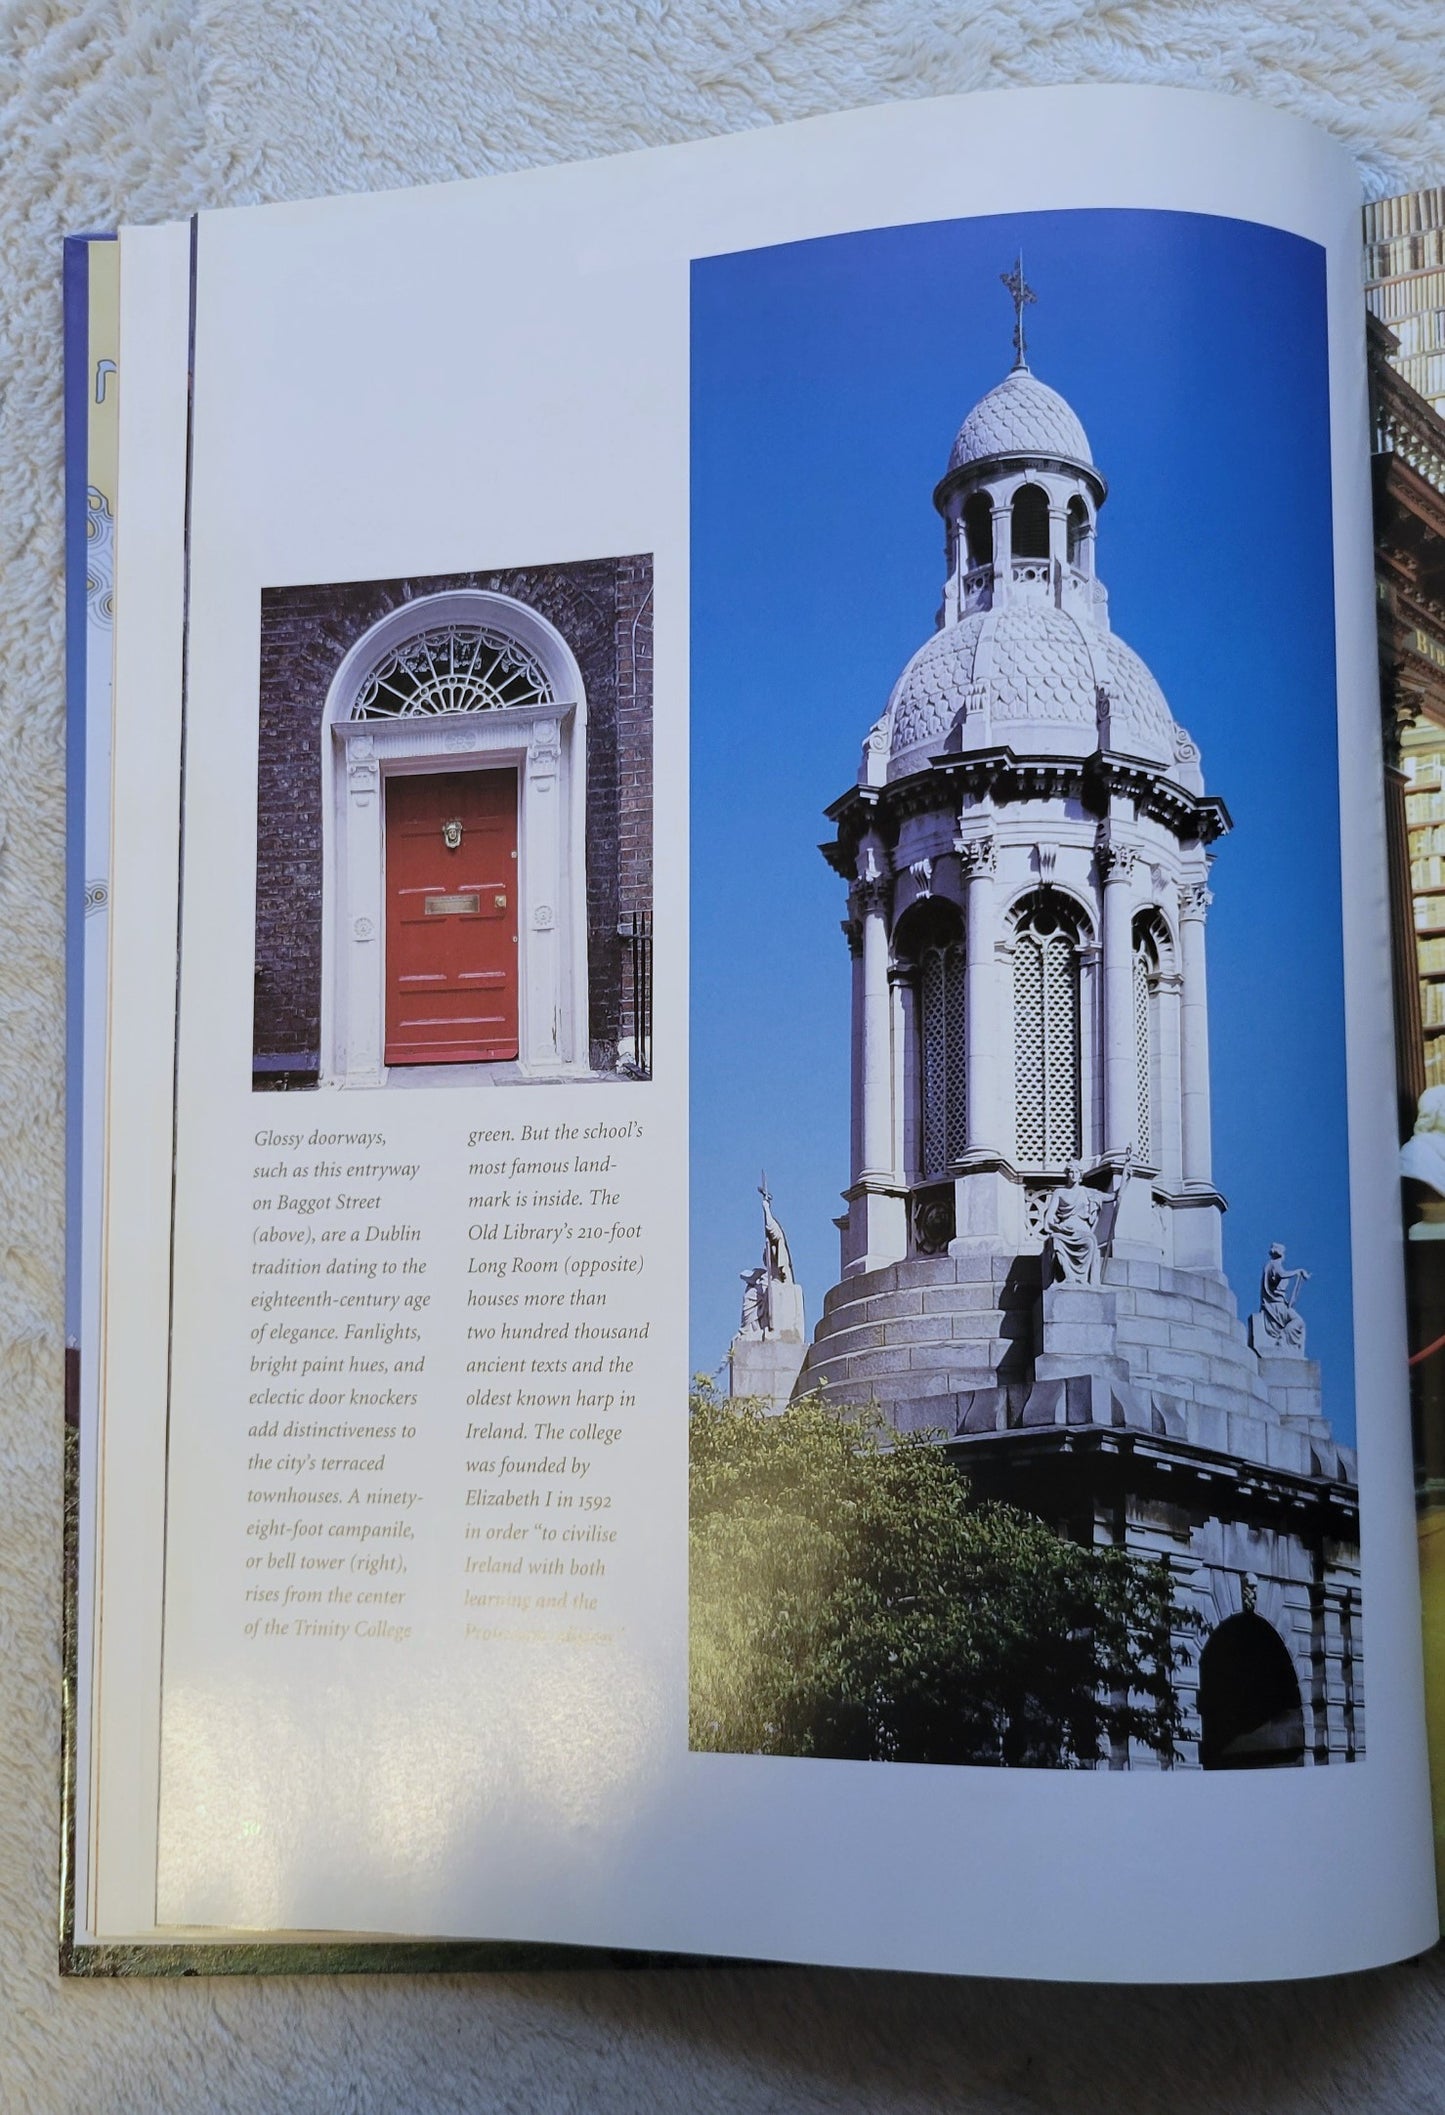 Used book for sale, travel photography, “Ireland: A Photographic Tour” by Carol W. Highsmith and Ted Landphair, published by Random House, 1998. View of interior page with architecture photos.